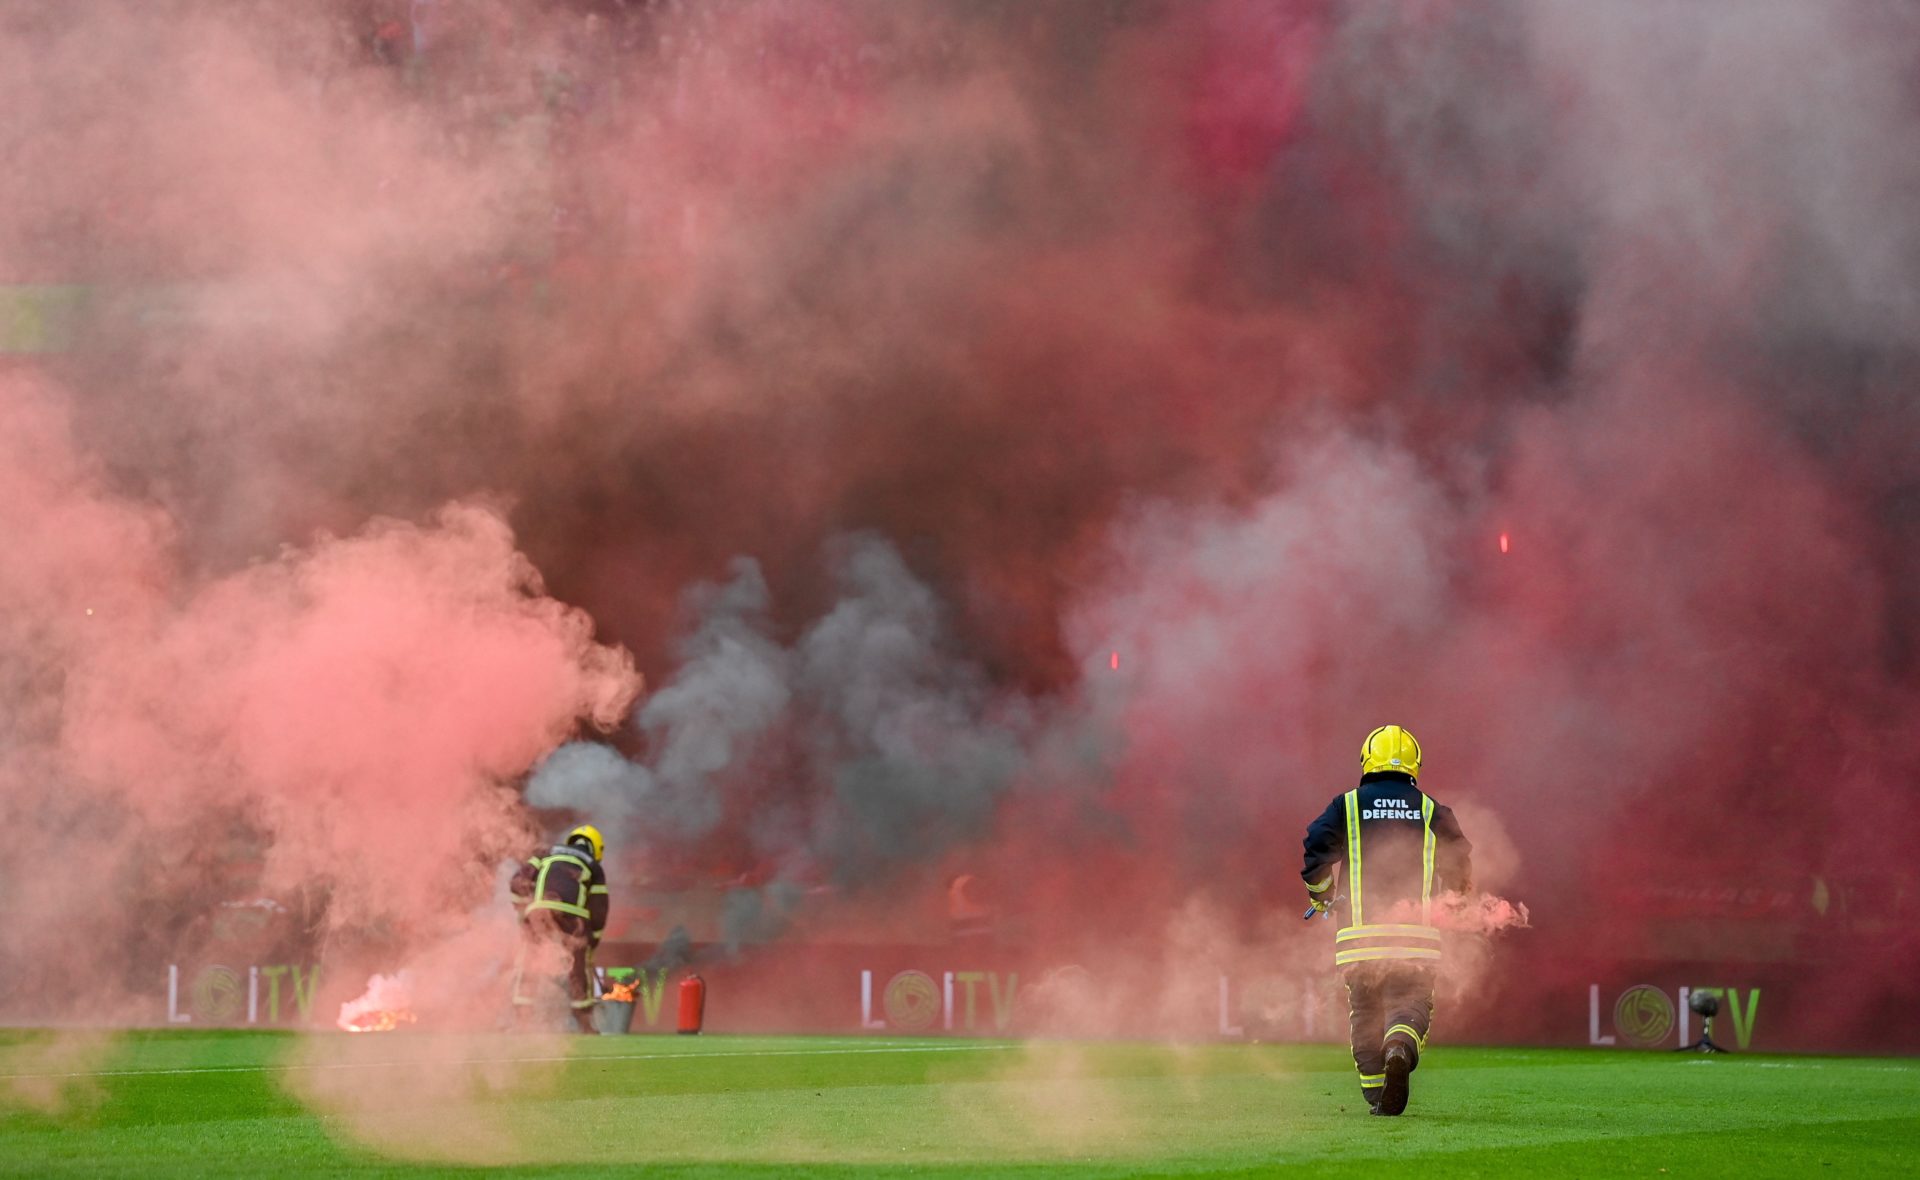 Members of the Fire Brigade clear the flares from the pitch before the FAI Cup Final between St Pats and Bohs